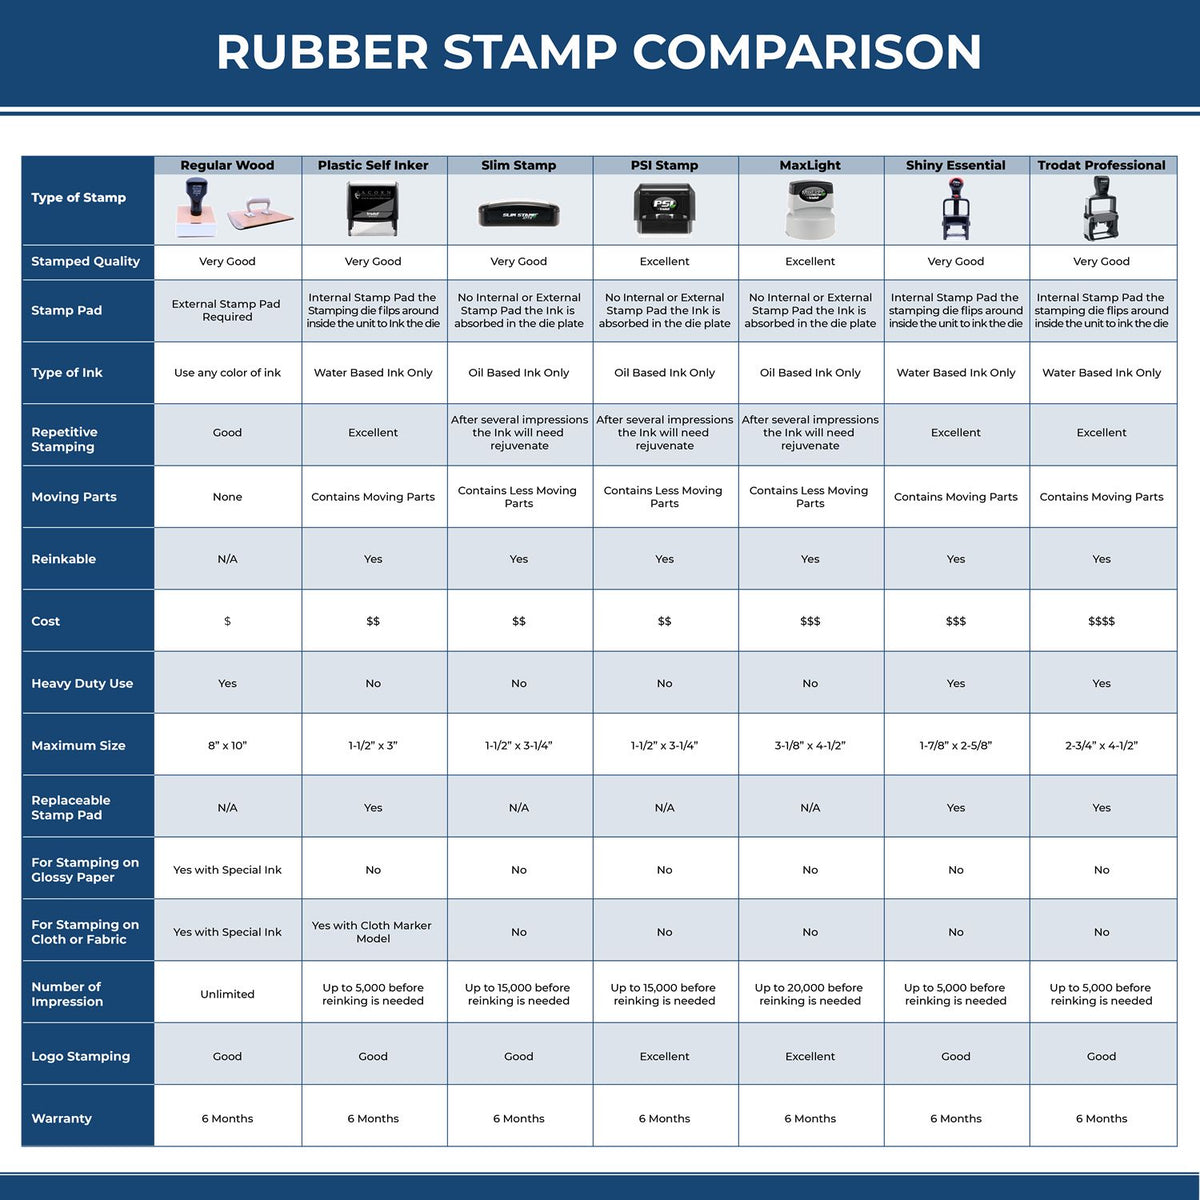 A comparison chart for the different types of mount models available for the North Dakota Professional Engineer Seal Stamp.